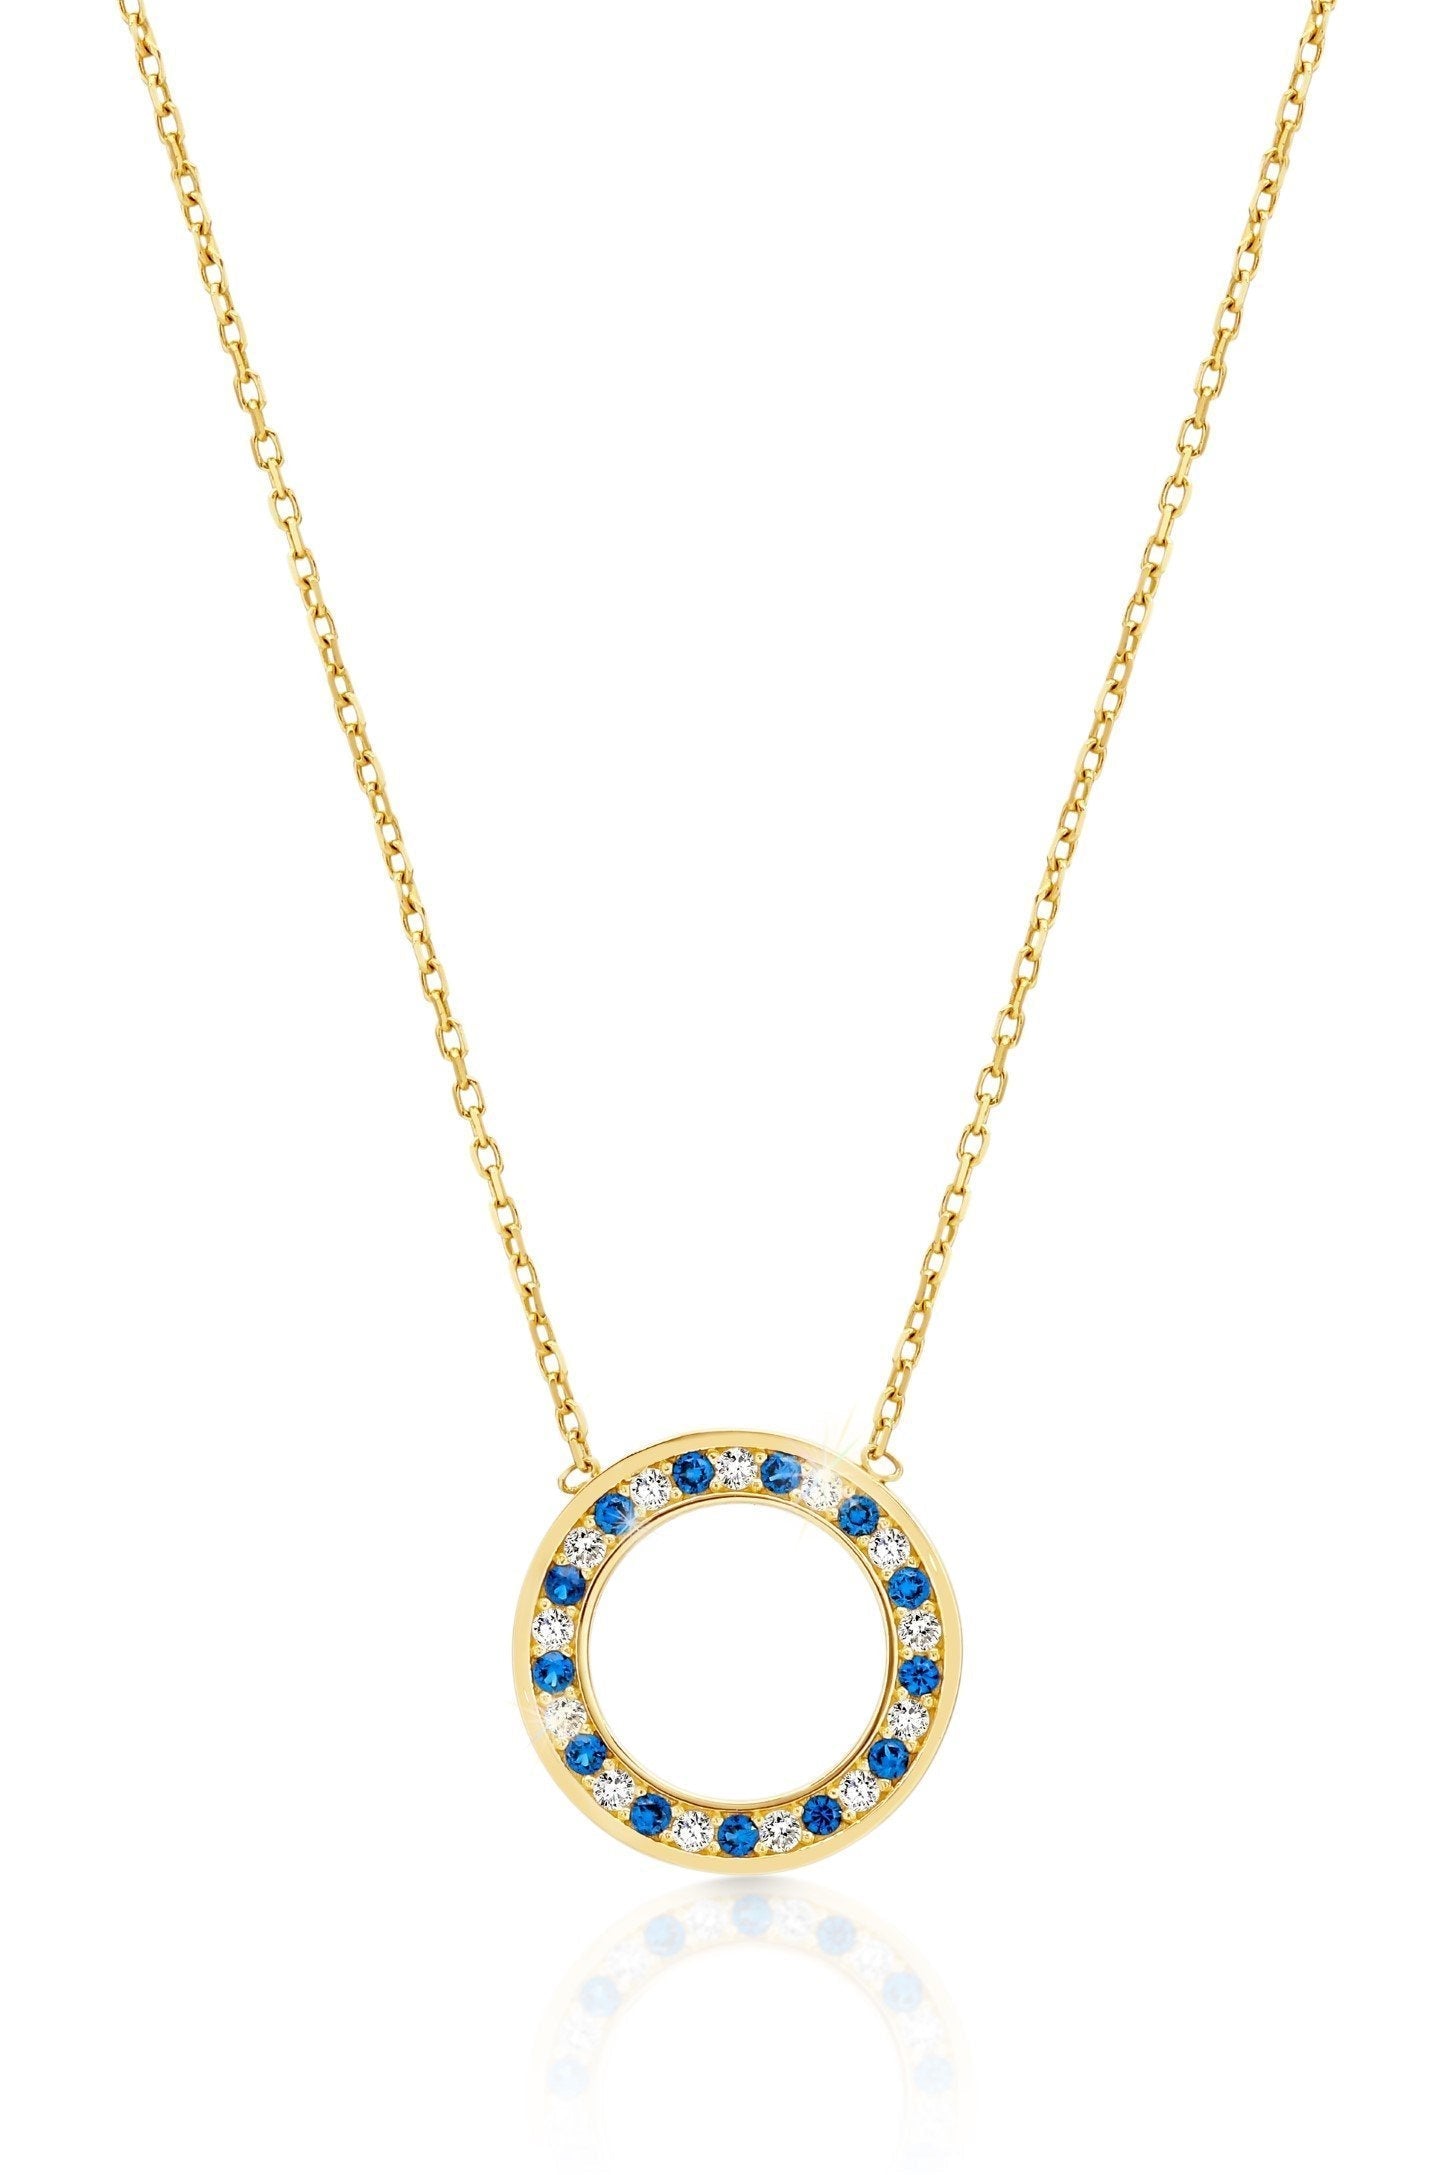 MP5866 9ct yellow gold open circle 12mm blue & white CZ necklace (7106961670308)